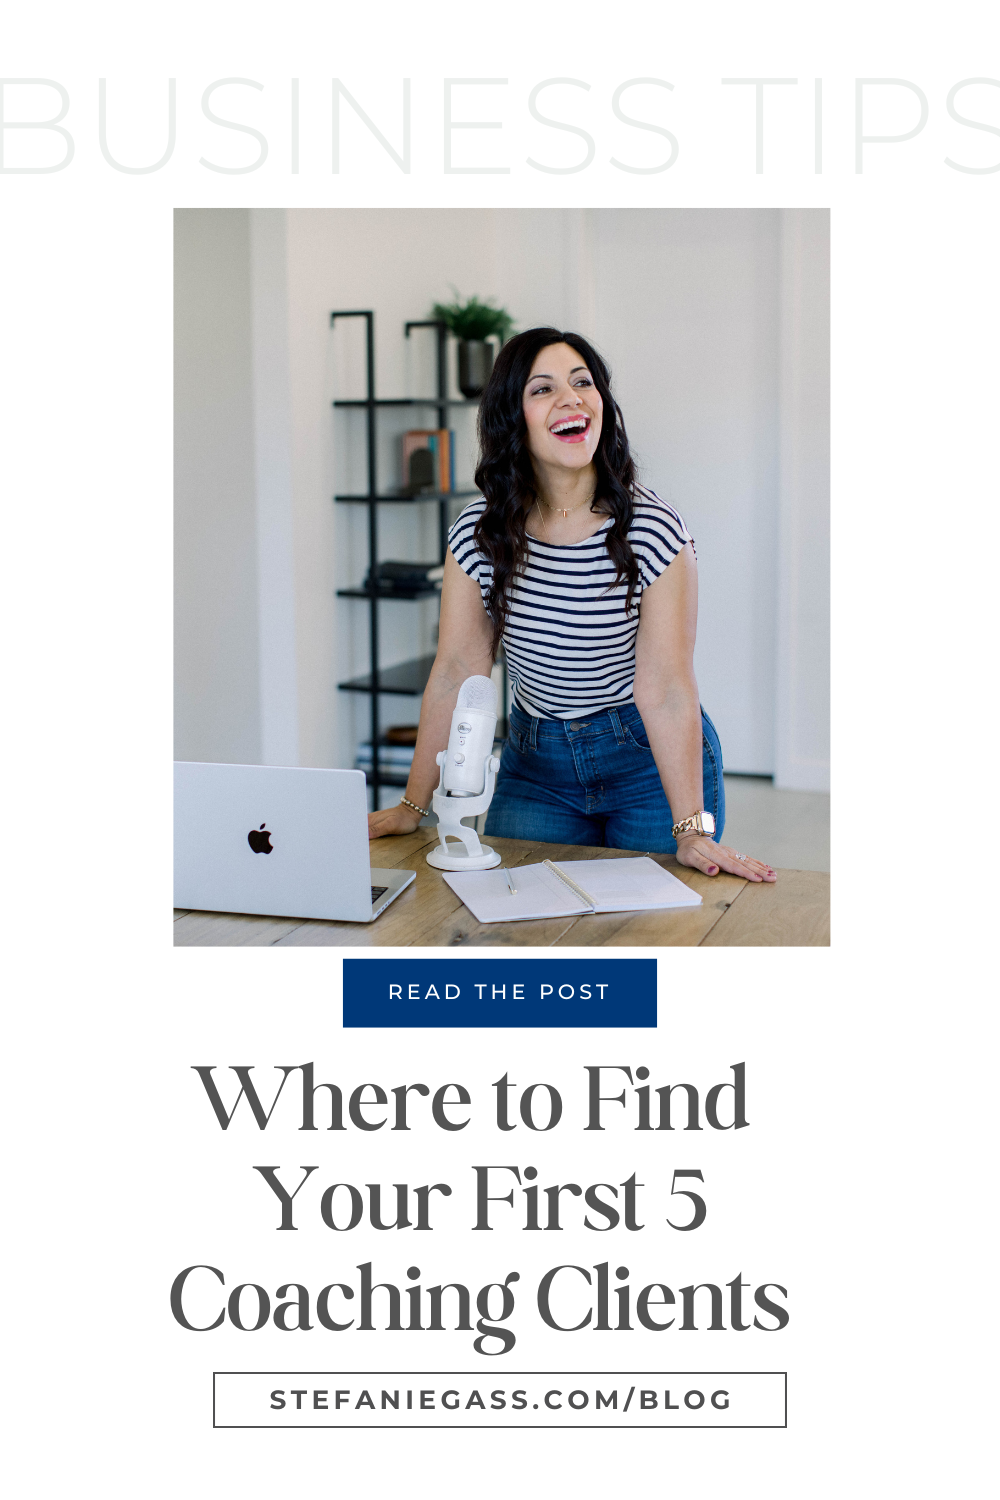 Image of a smiling dark haired woman. Text says " Where to find your first 5 coaching clients." 